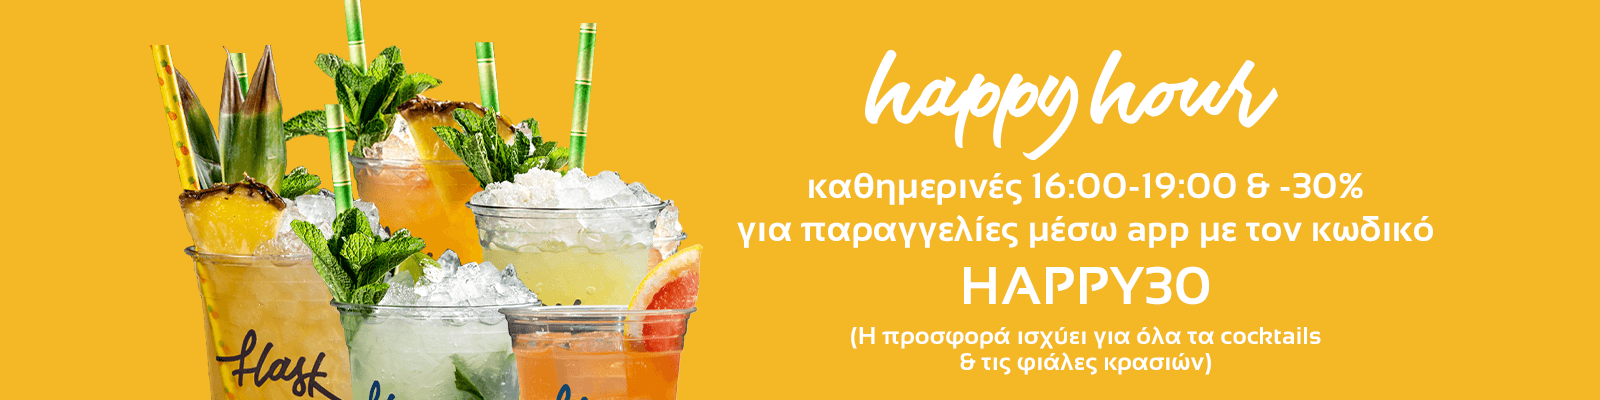 happy_hour.png